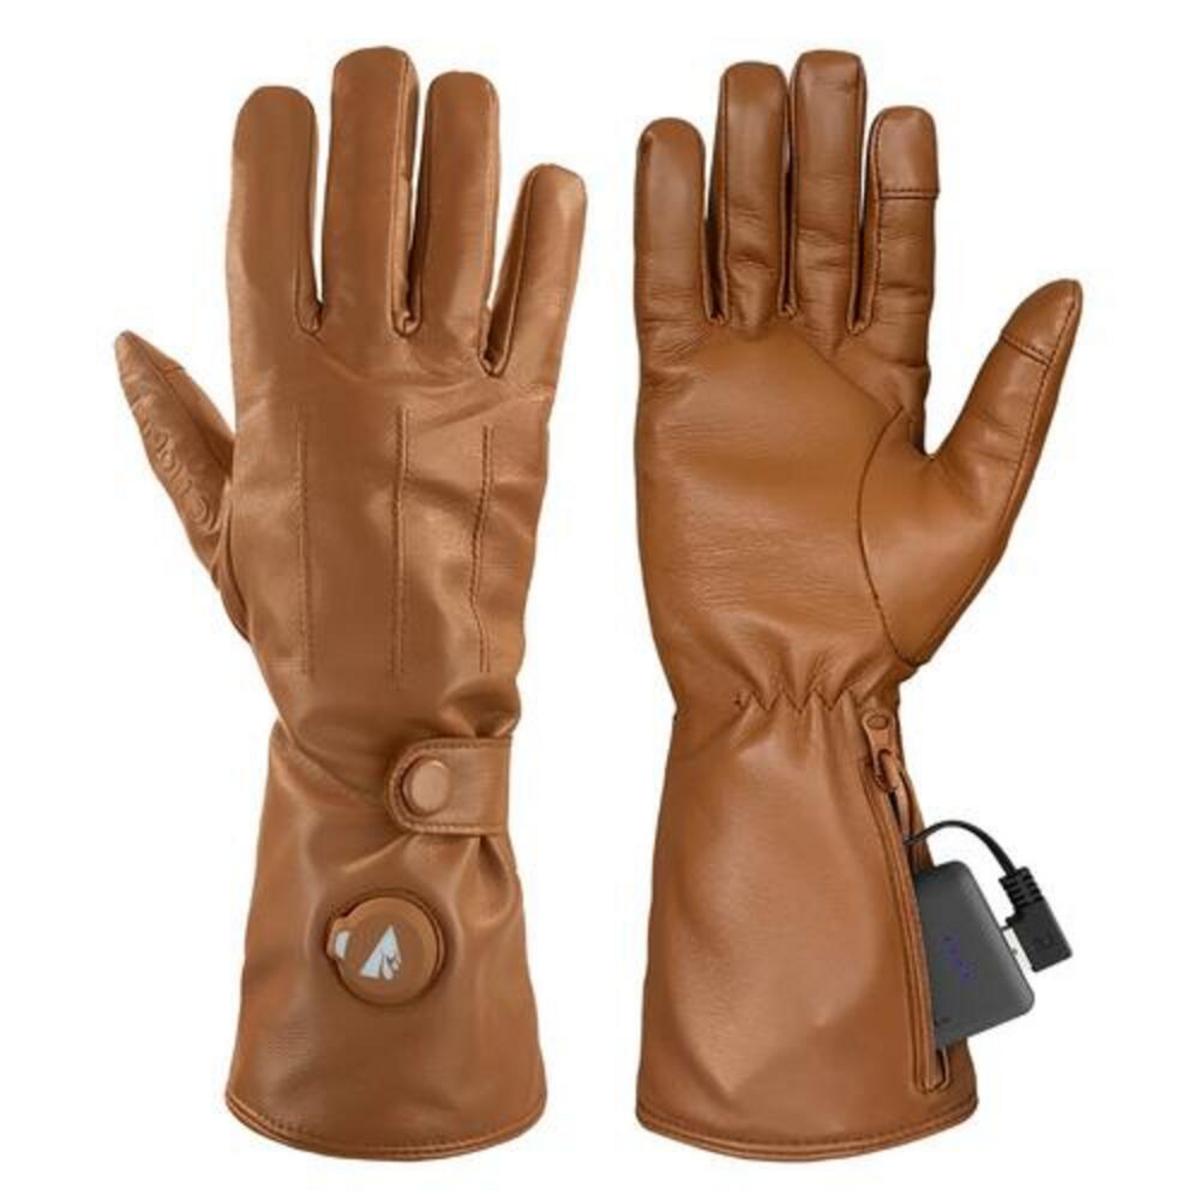 Open Box ActionHeat 5V Women's Battery Heated Leather Dress Glove - Heated